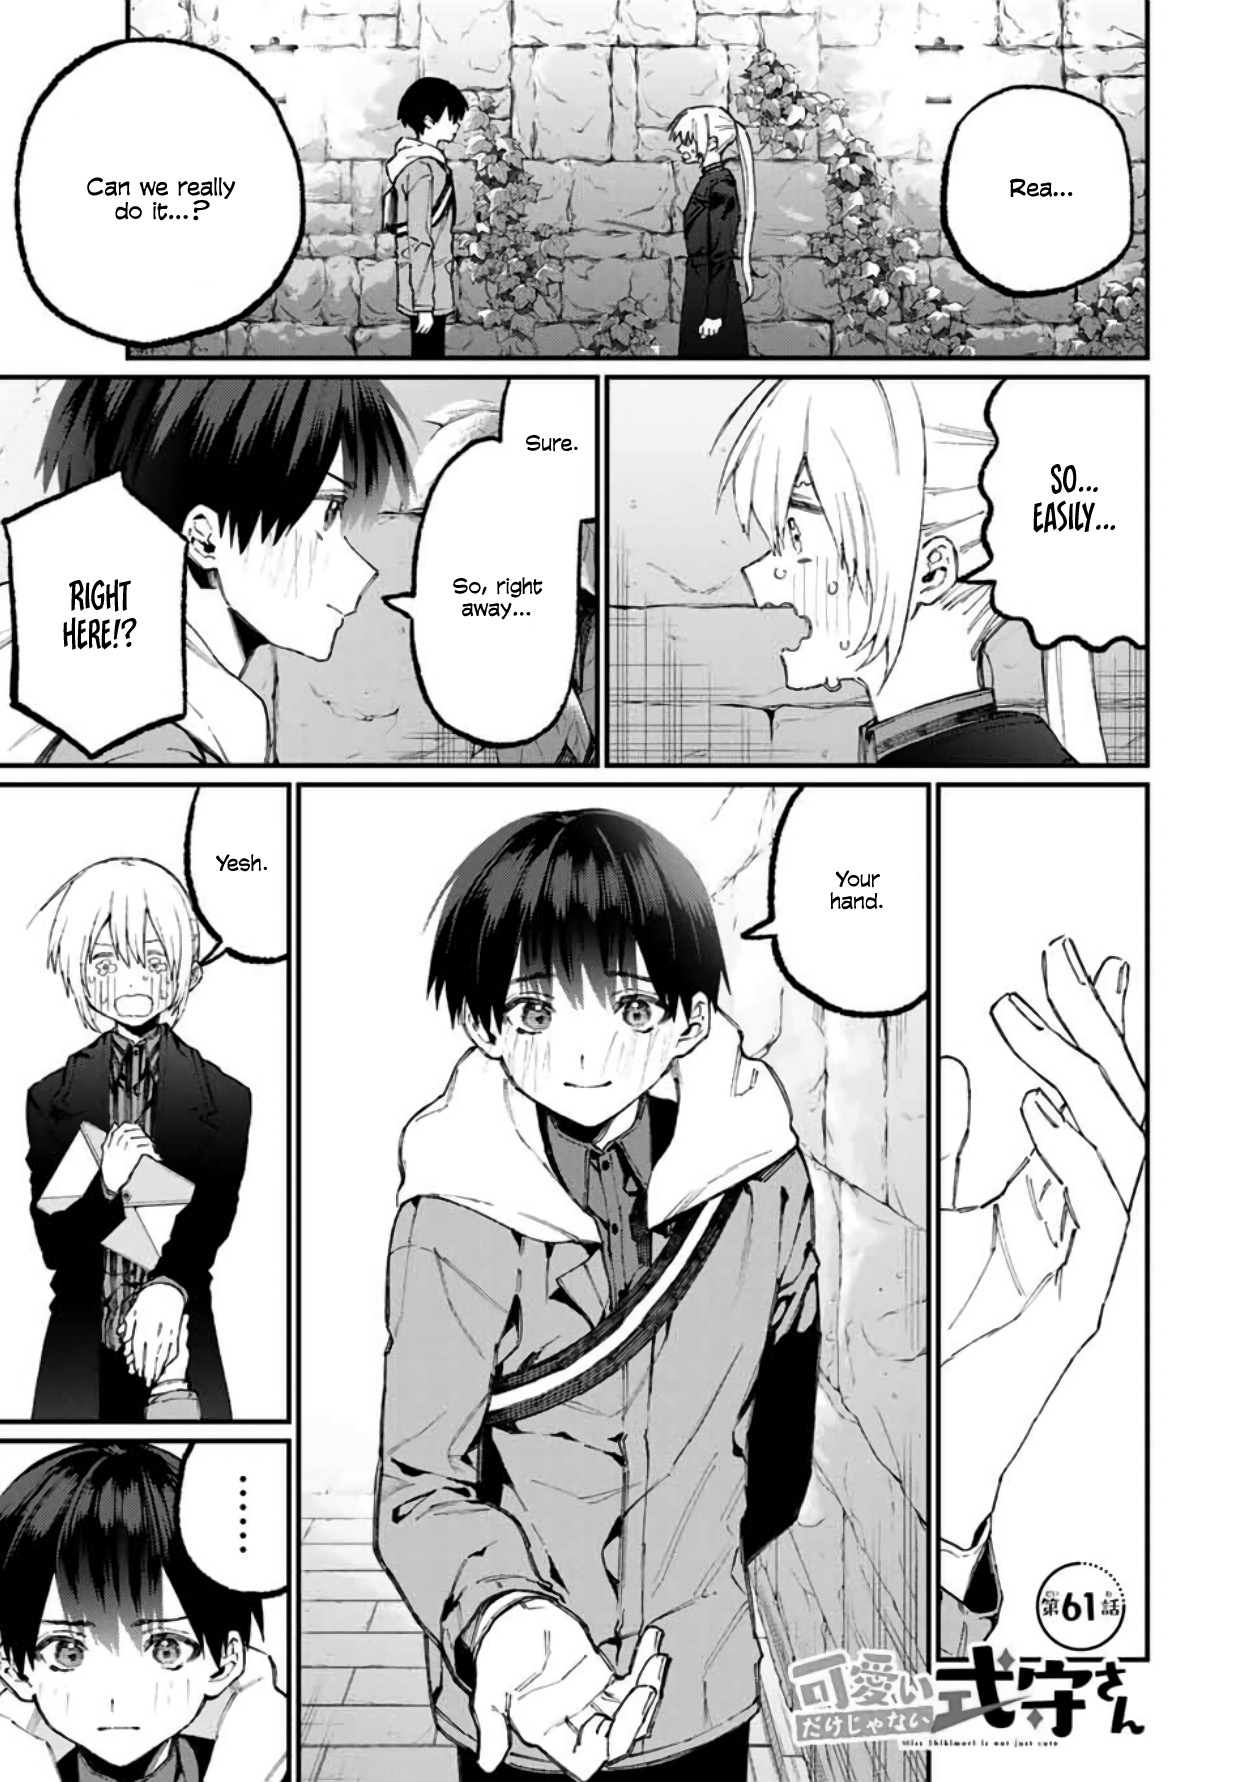 That Girl Is Not Just Cute Vol. 6 Ch. 61